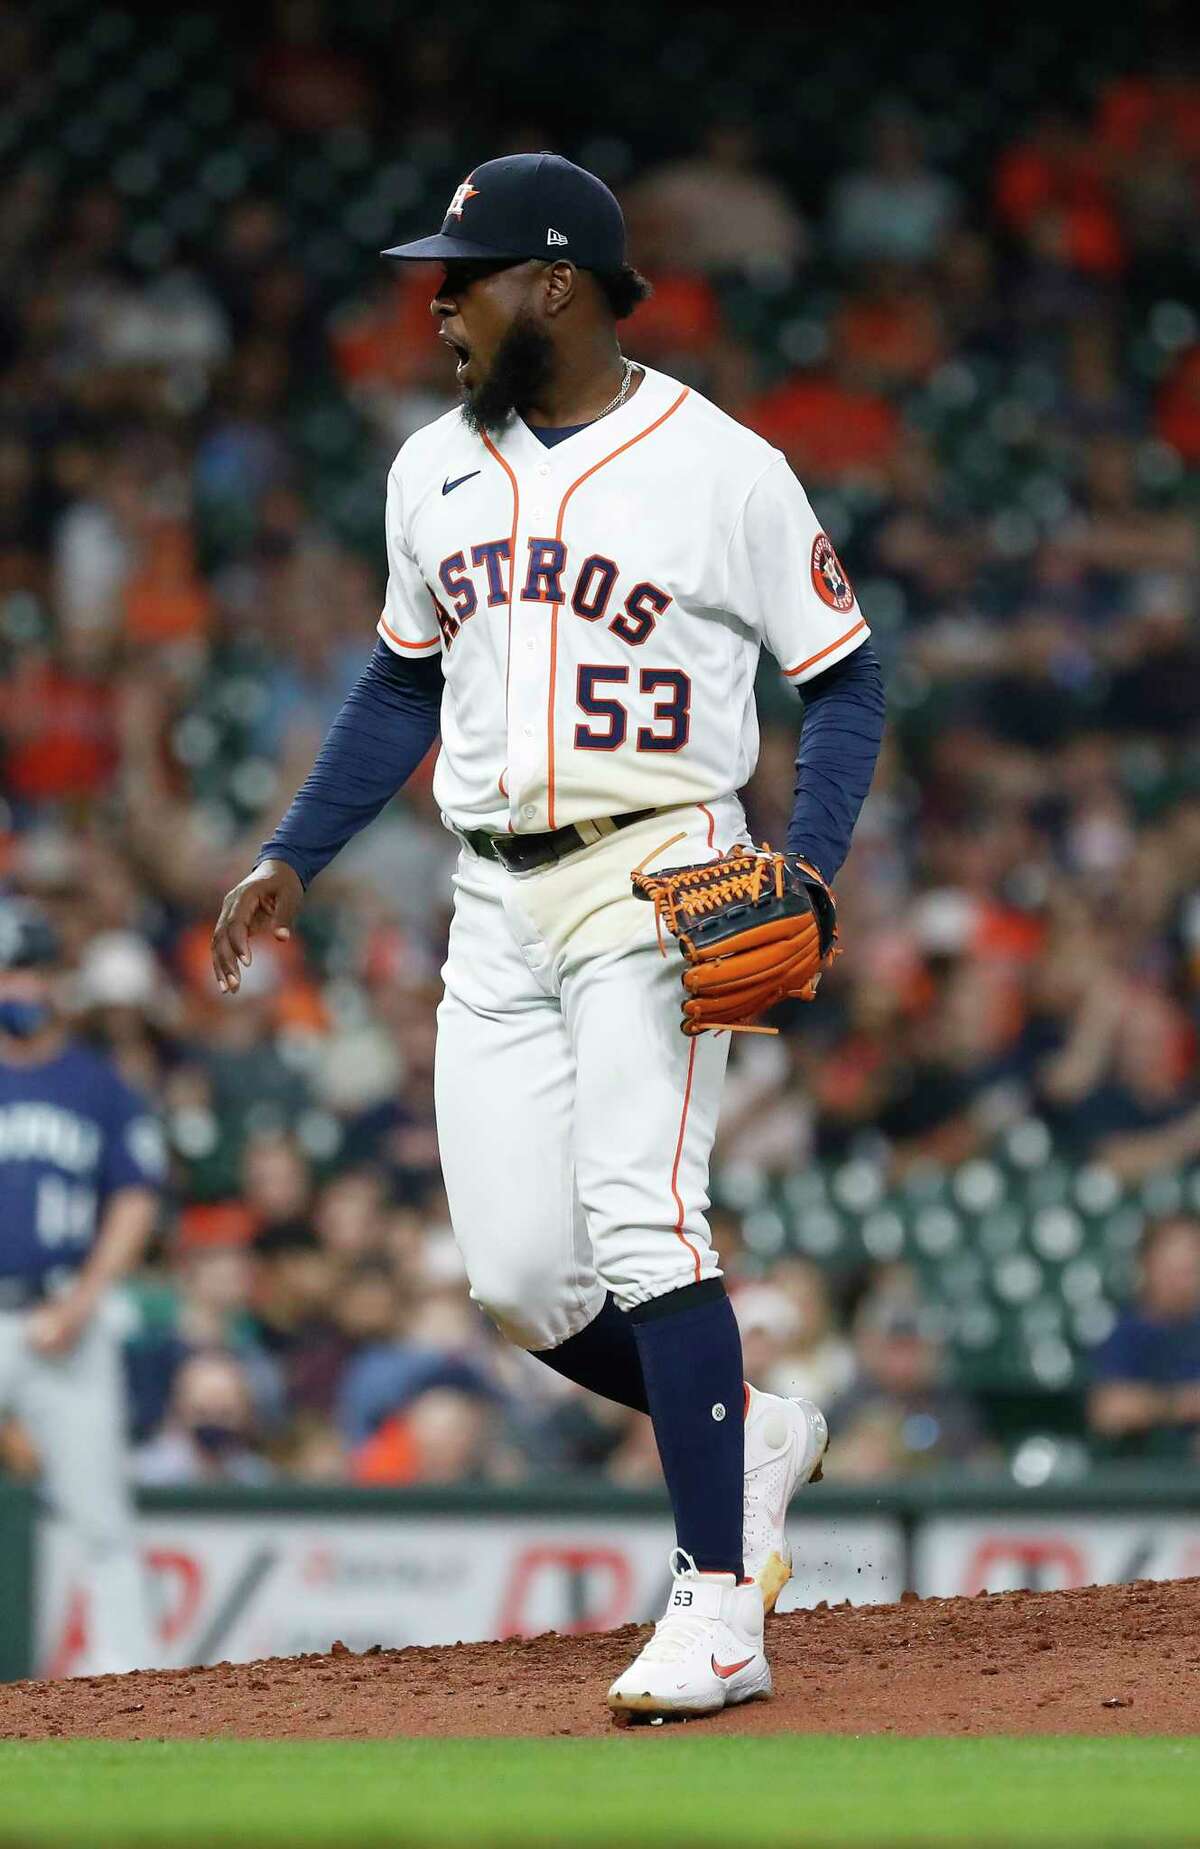 Houston Astros starting pitcher Cristian Javier (53) reacts after striking out Seattle Mariners Sam Haggerty to end the seventh inning of an MLB baseball game at Minute Maid Park, Tuesday, April 27, 2021, in Houston.